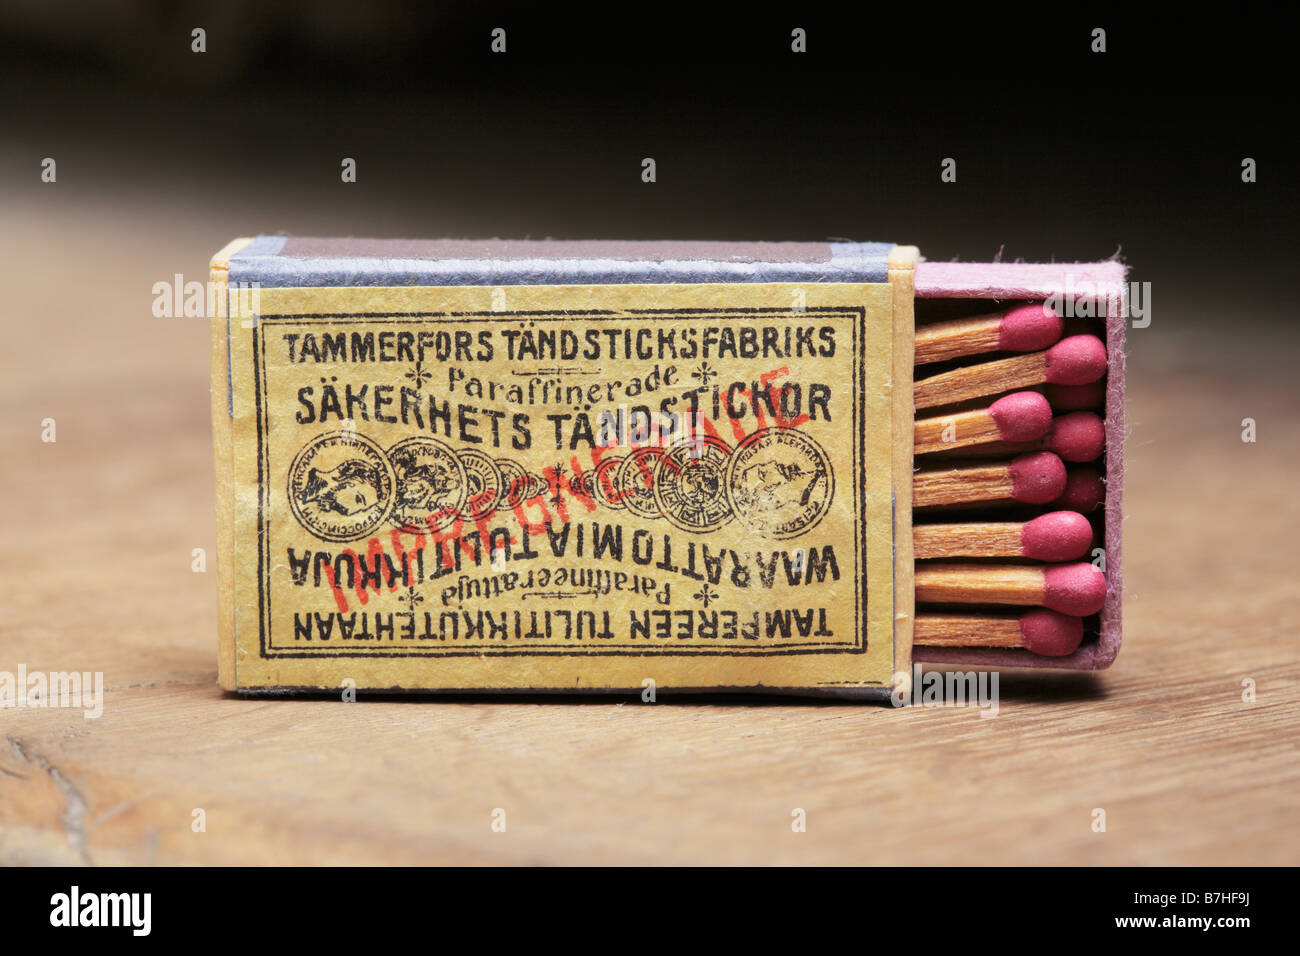 Old box of safety matches manufactured in Tampere Finland in 19th century Stock Photo